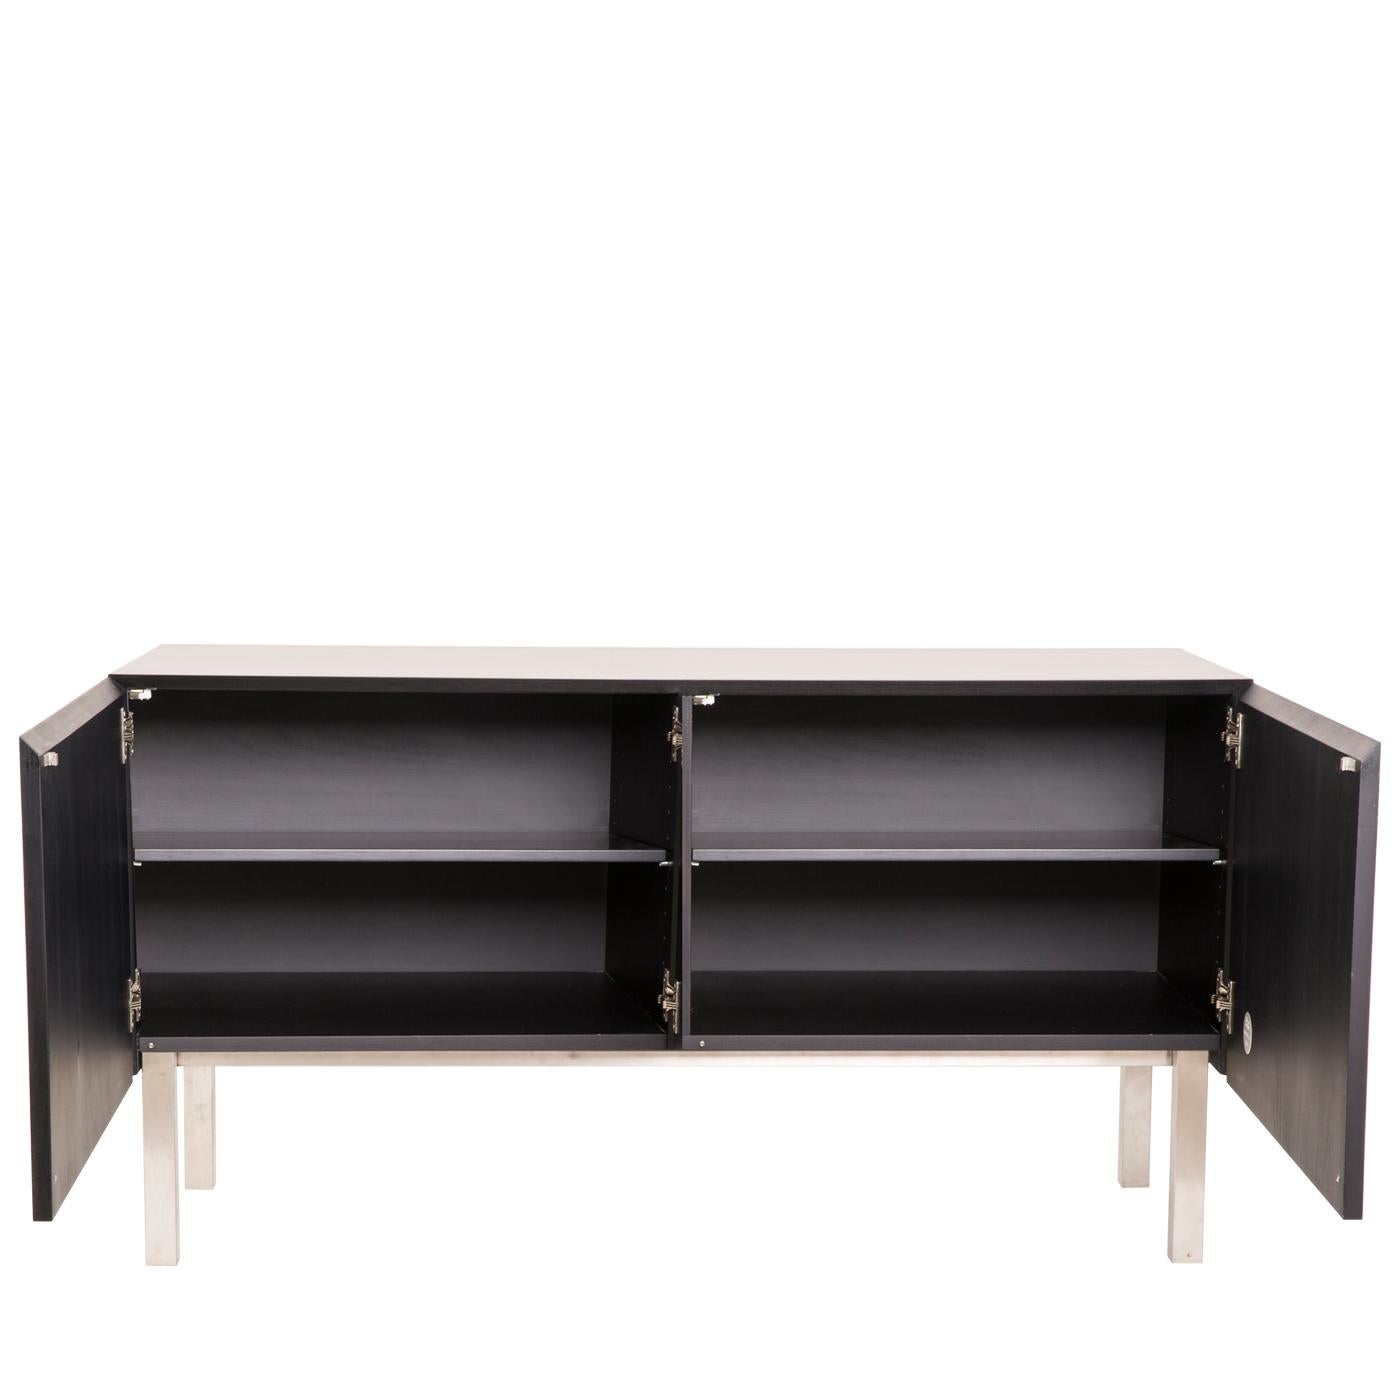 Sideboard with brushed metal legs and base, inlaid doors and matt lacquered structure in wood. Fitted with push-pull doors and one internal shelf. It is also available in the hanging version.

FINISH:
Limited Edition Art Inlay

For the author, this